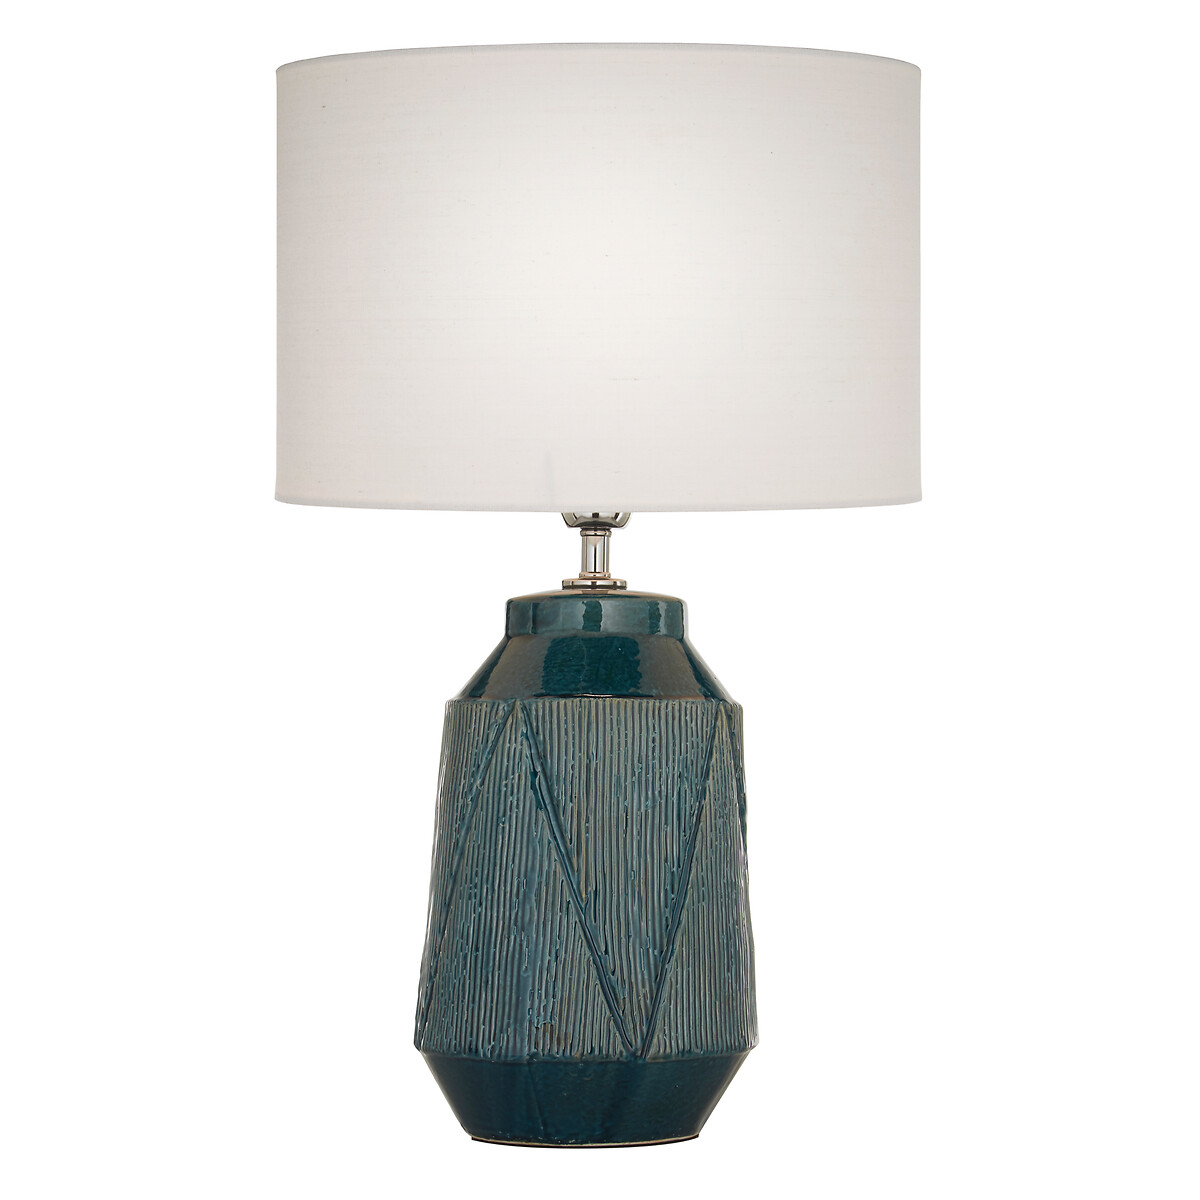 Teal Aztec Pattern Gloss Ceramic Table, Aztec Design Table Lamps